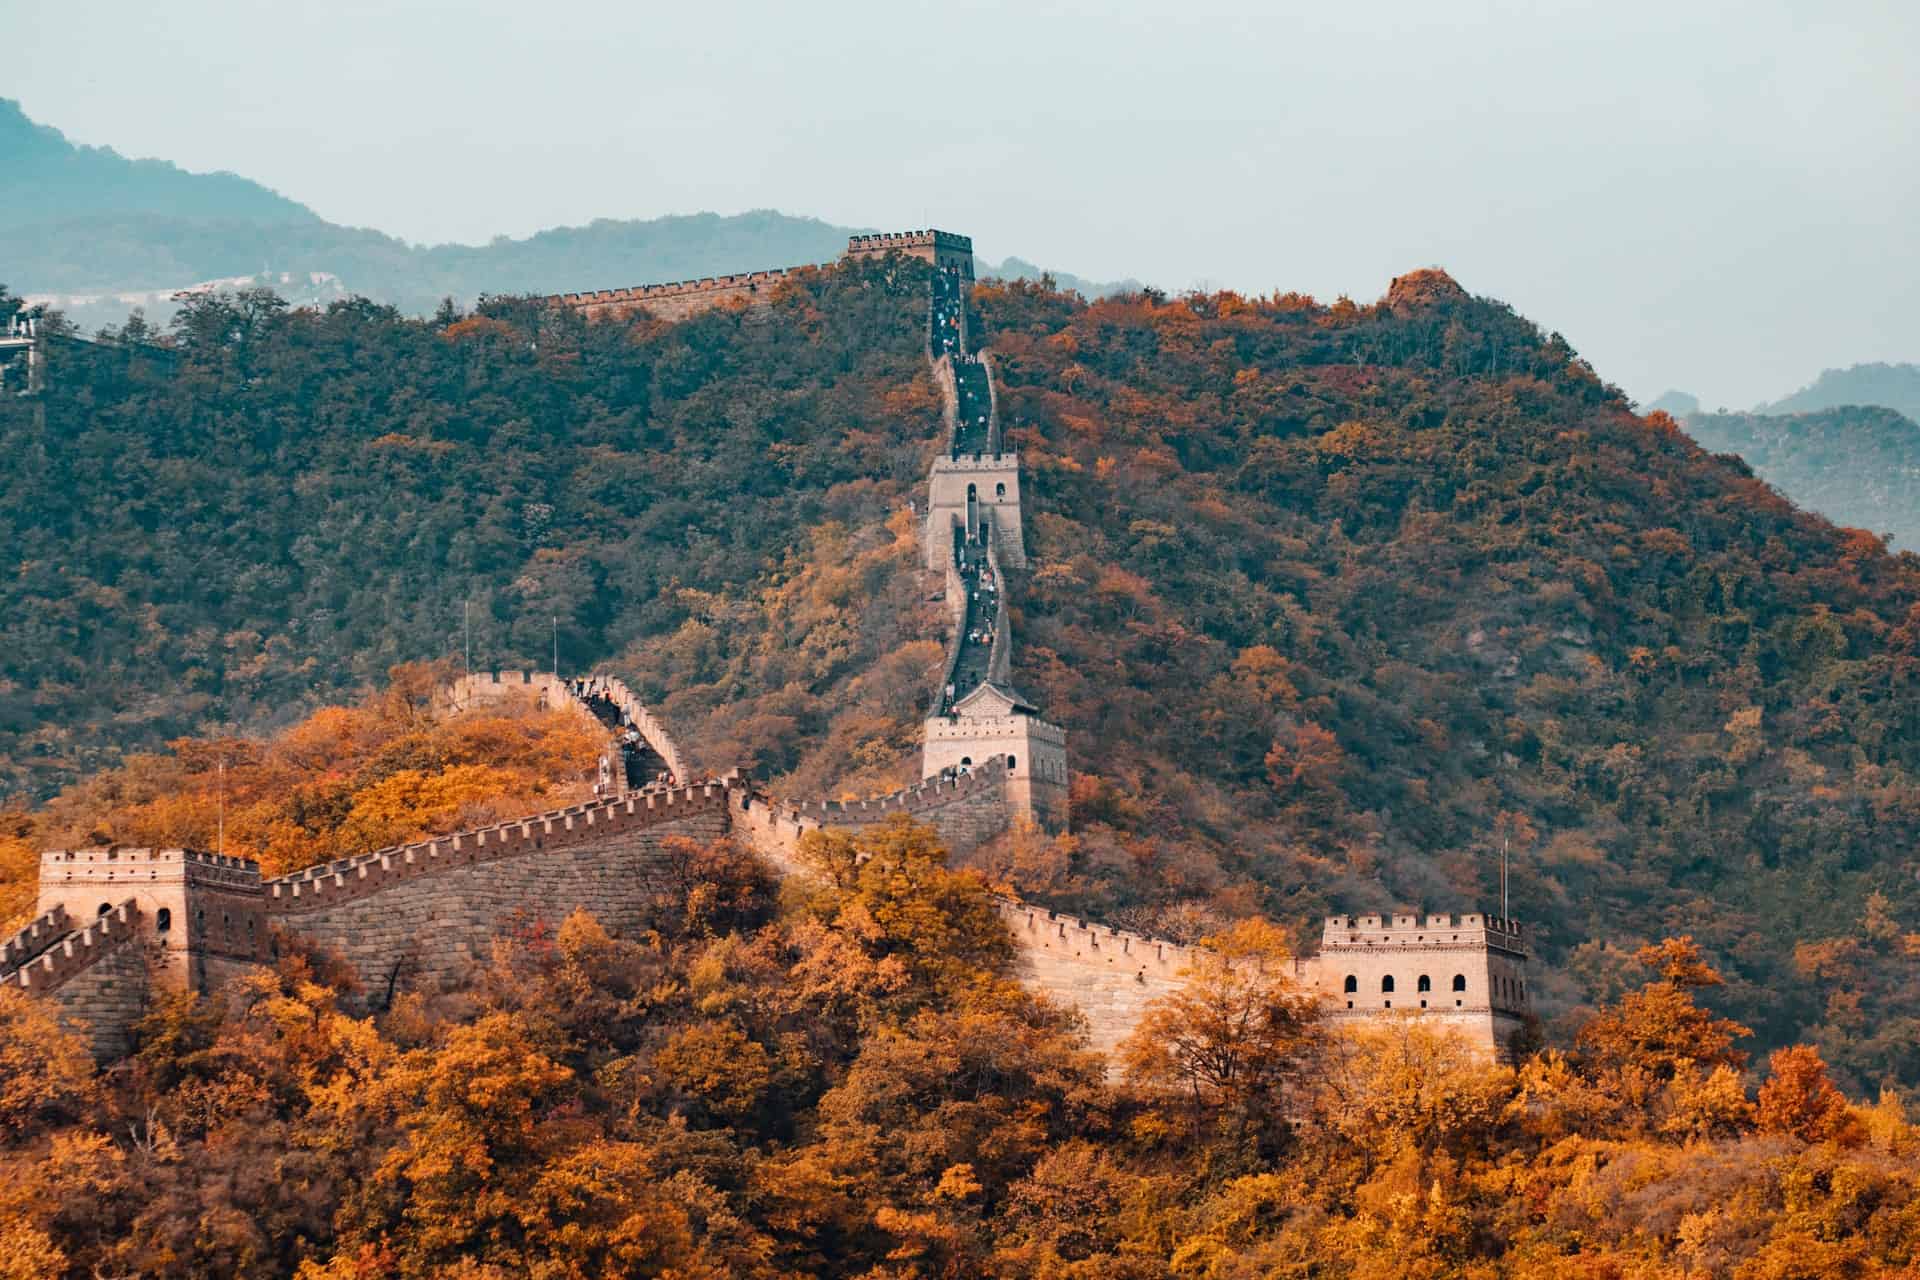 Best things to do in Beijing China - Austin Bellino - Great Wall of China by Hanson Lu on Unsplash